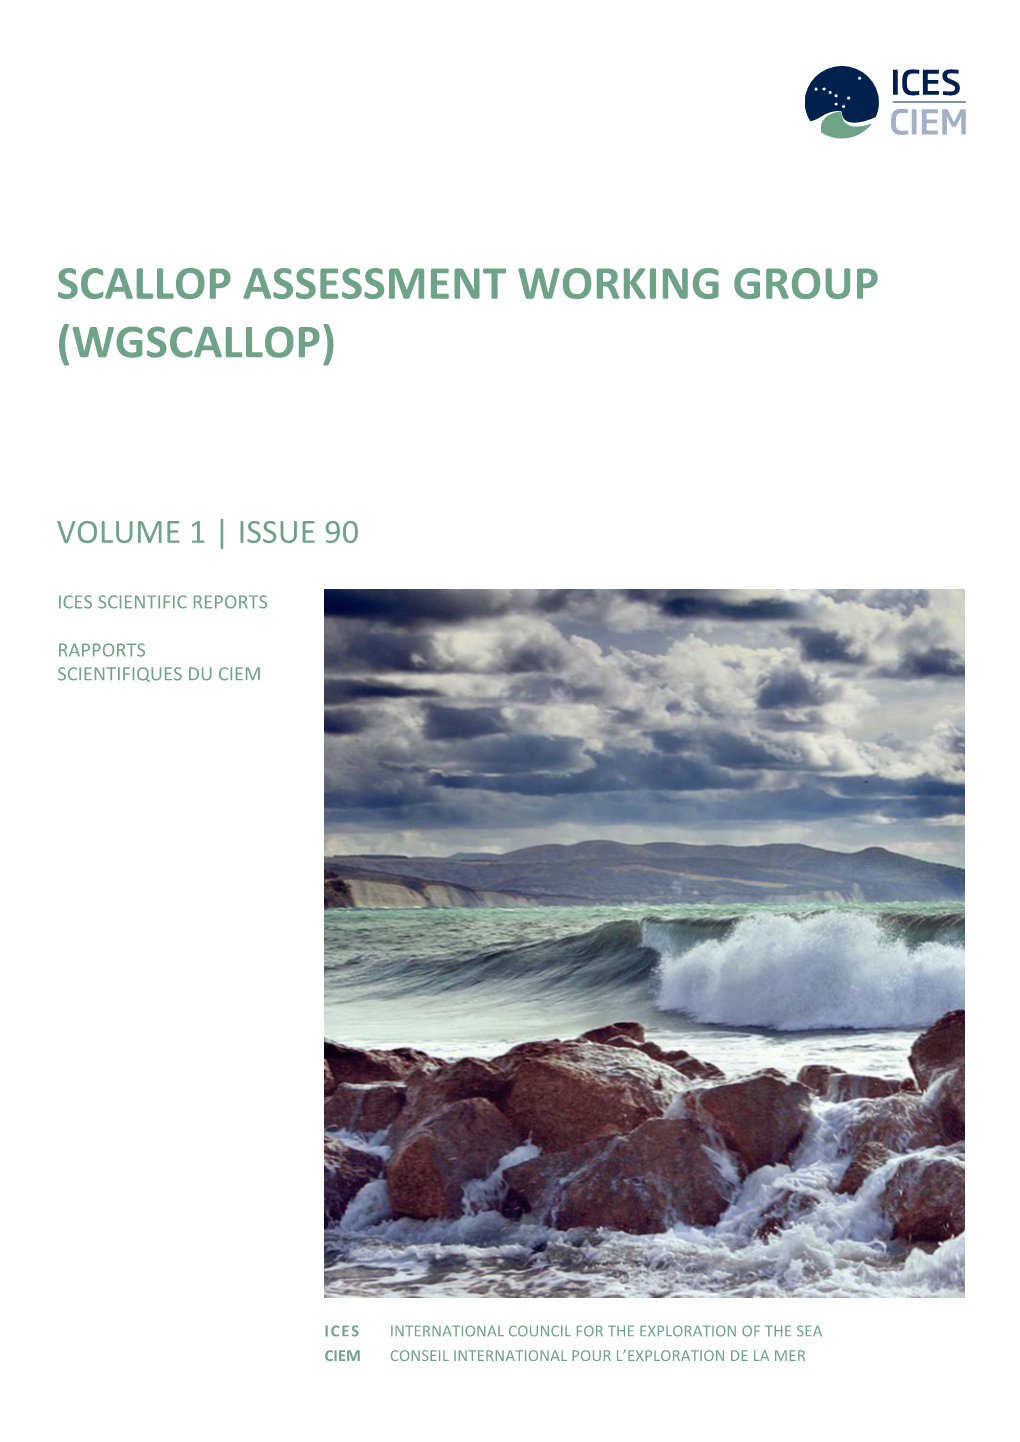 ICES. 2019. Scallop Assessment Working Group (WGSCALLOP)